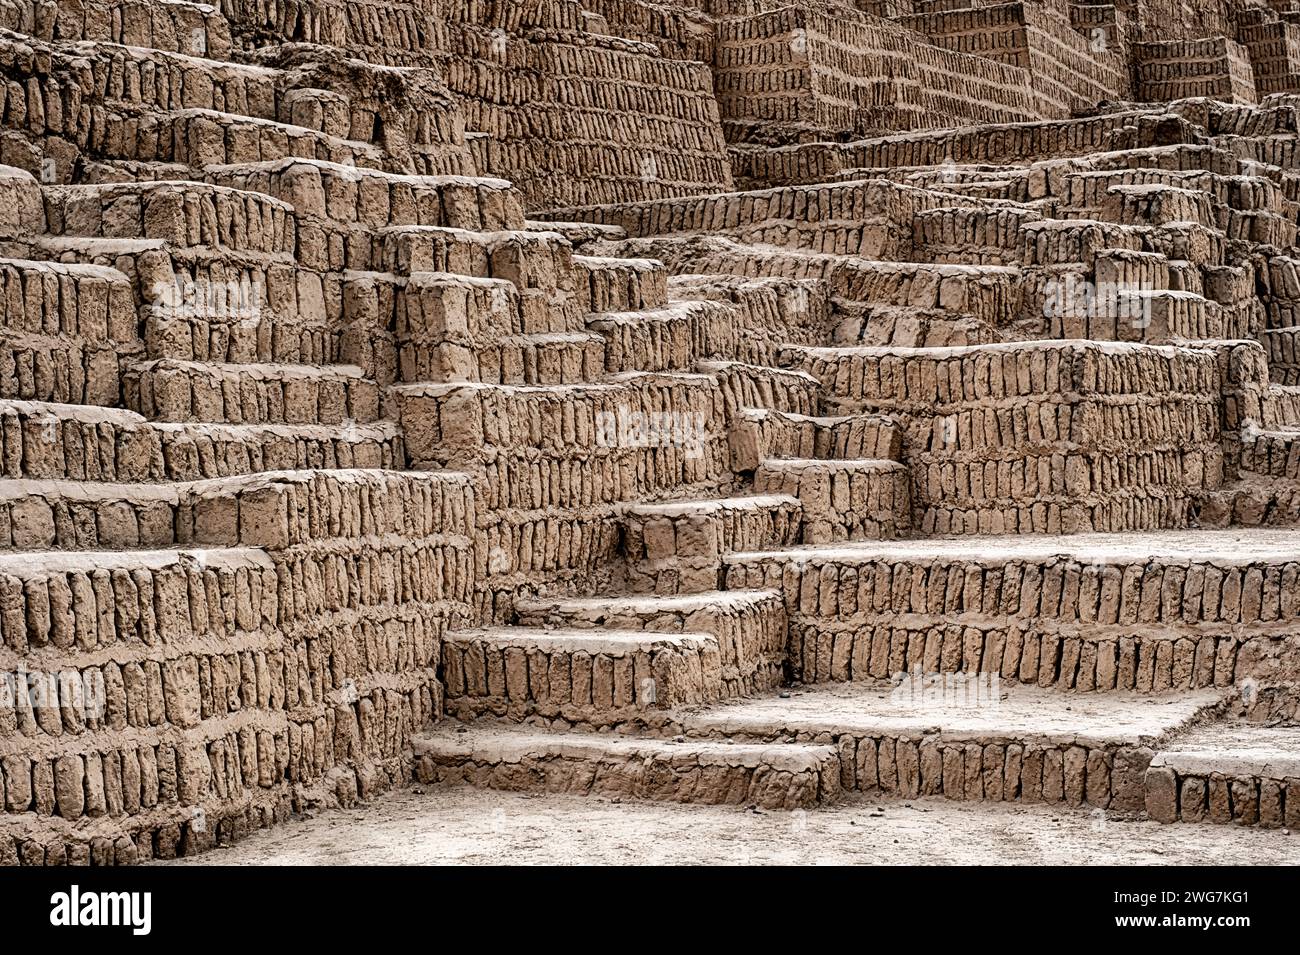 The ancient ruins of the Huaca Pucllana pyramid in Lima are constructed with rows of dried adobe bricks. Stock Photo